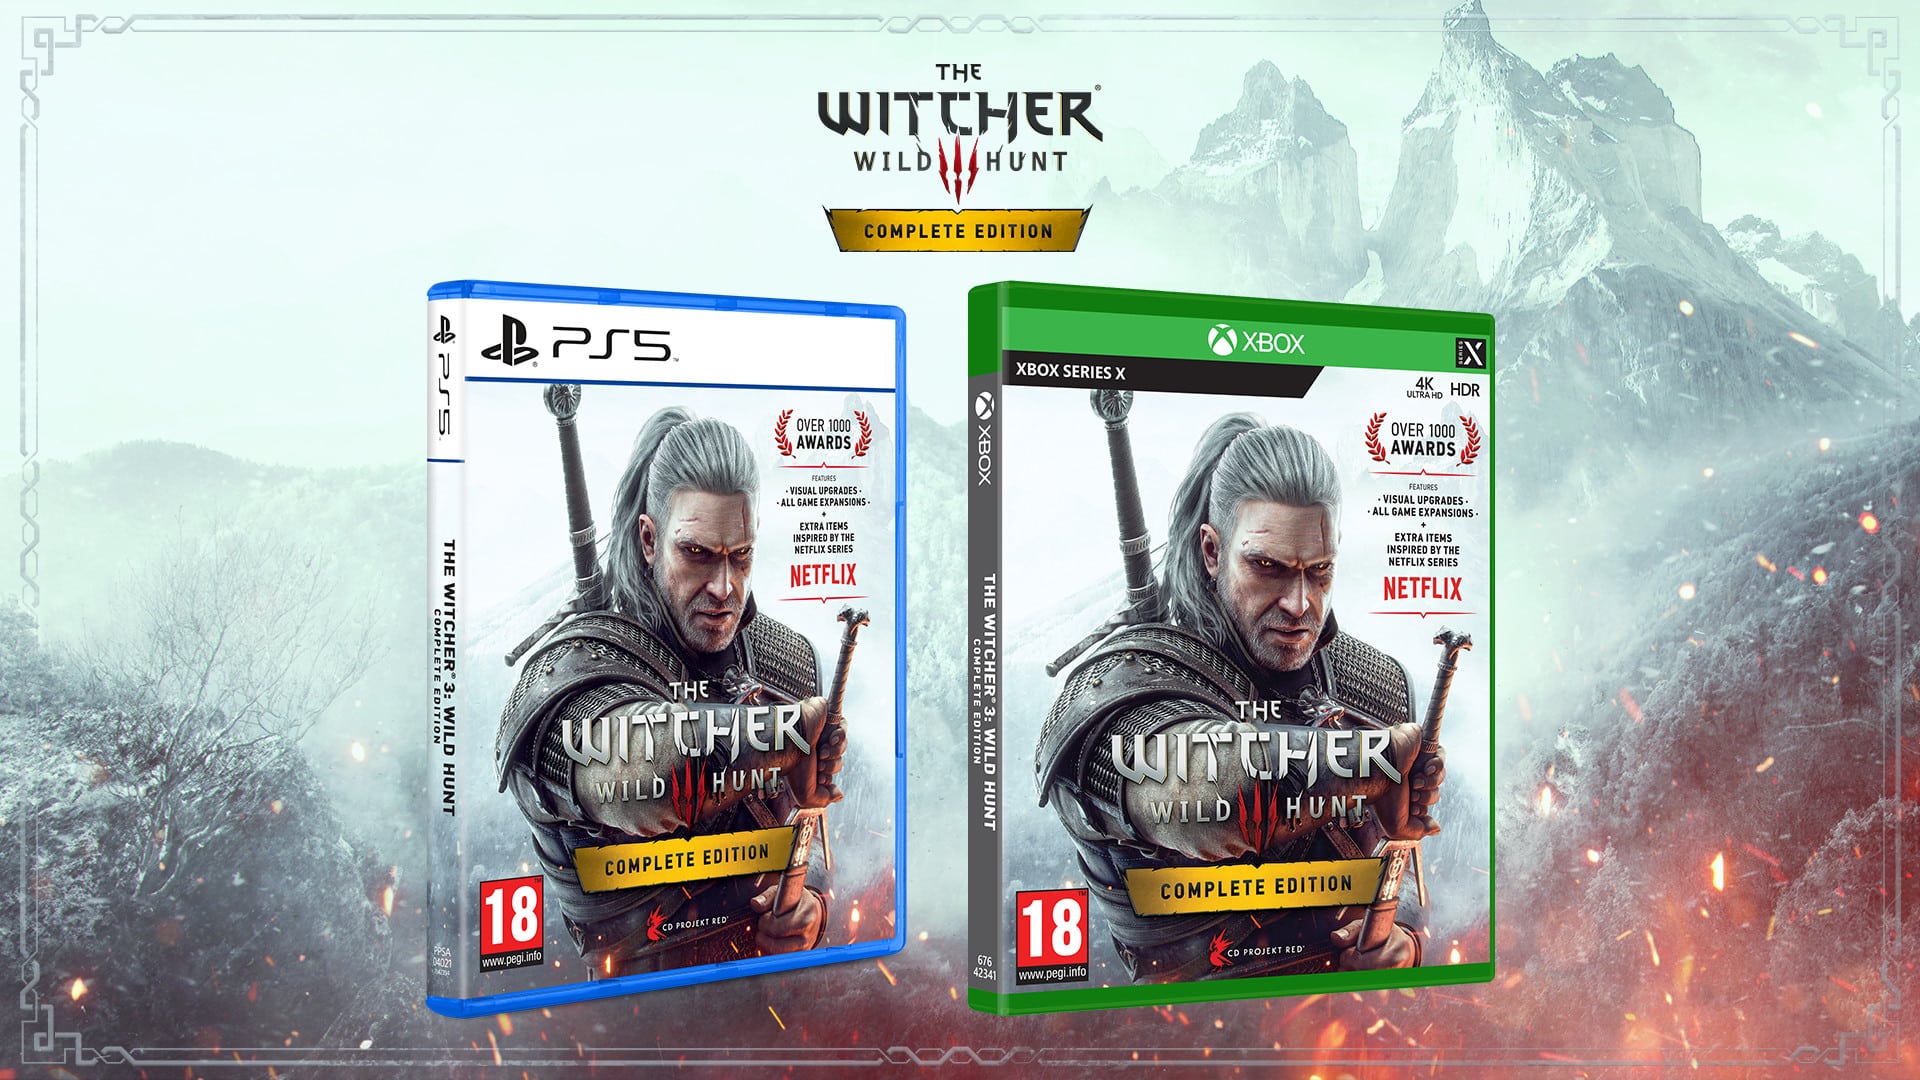 The Witcher 3: Wild Hunt – Complete Edition Physical PS5 & Xbox Series X Release Becomes Available January 26, 2023